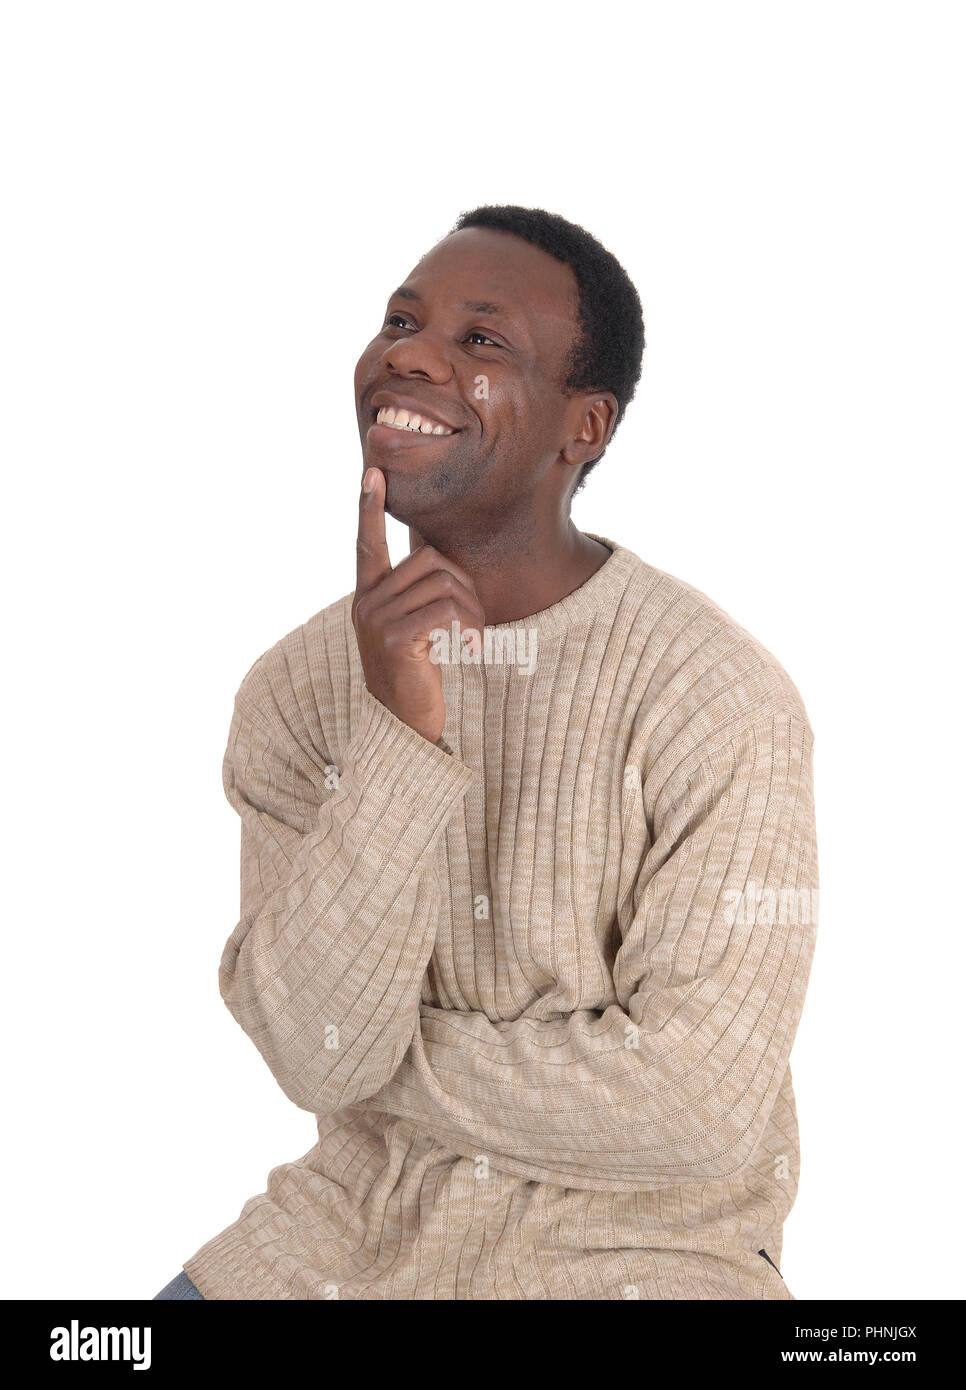 Happy African man with a smiling face looking up Stock Photo